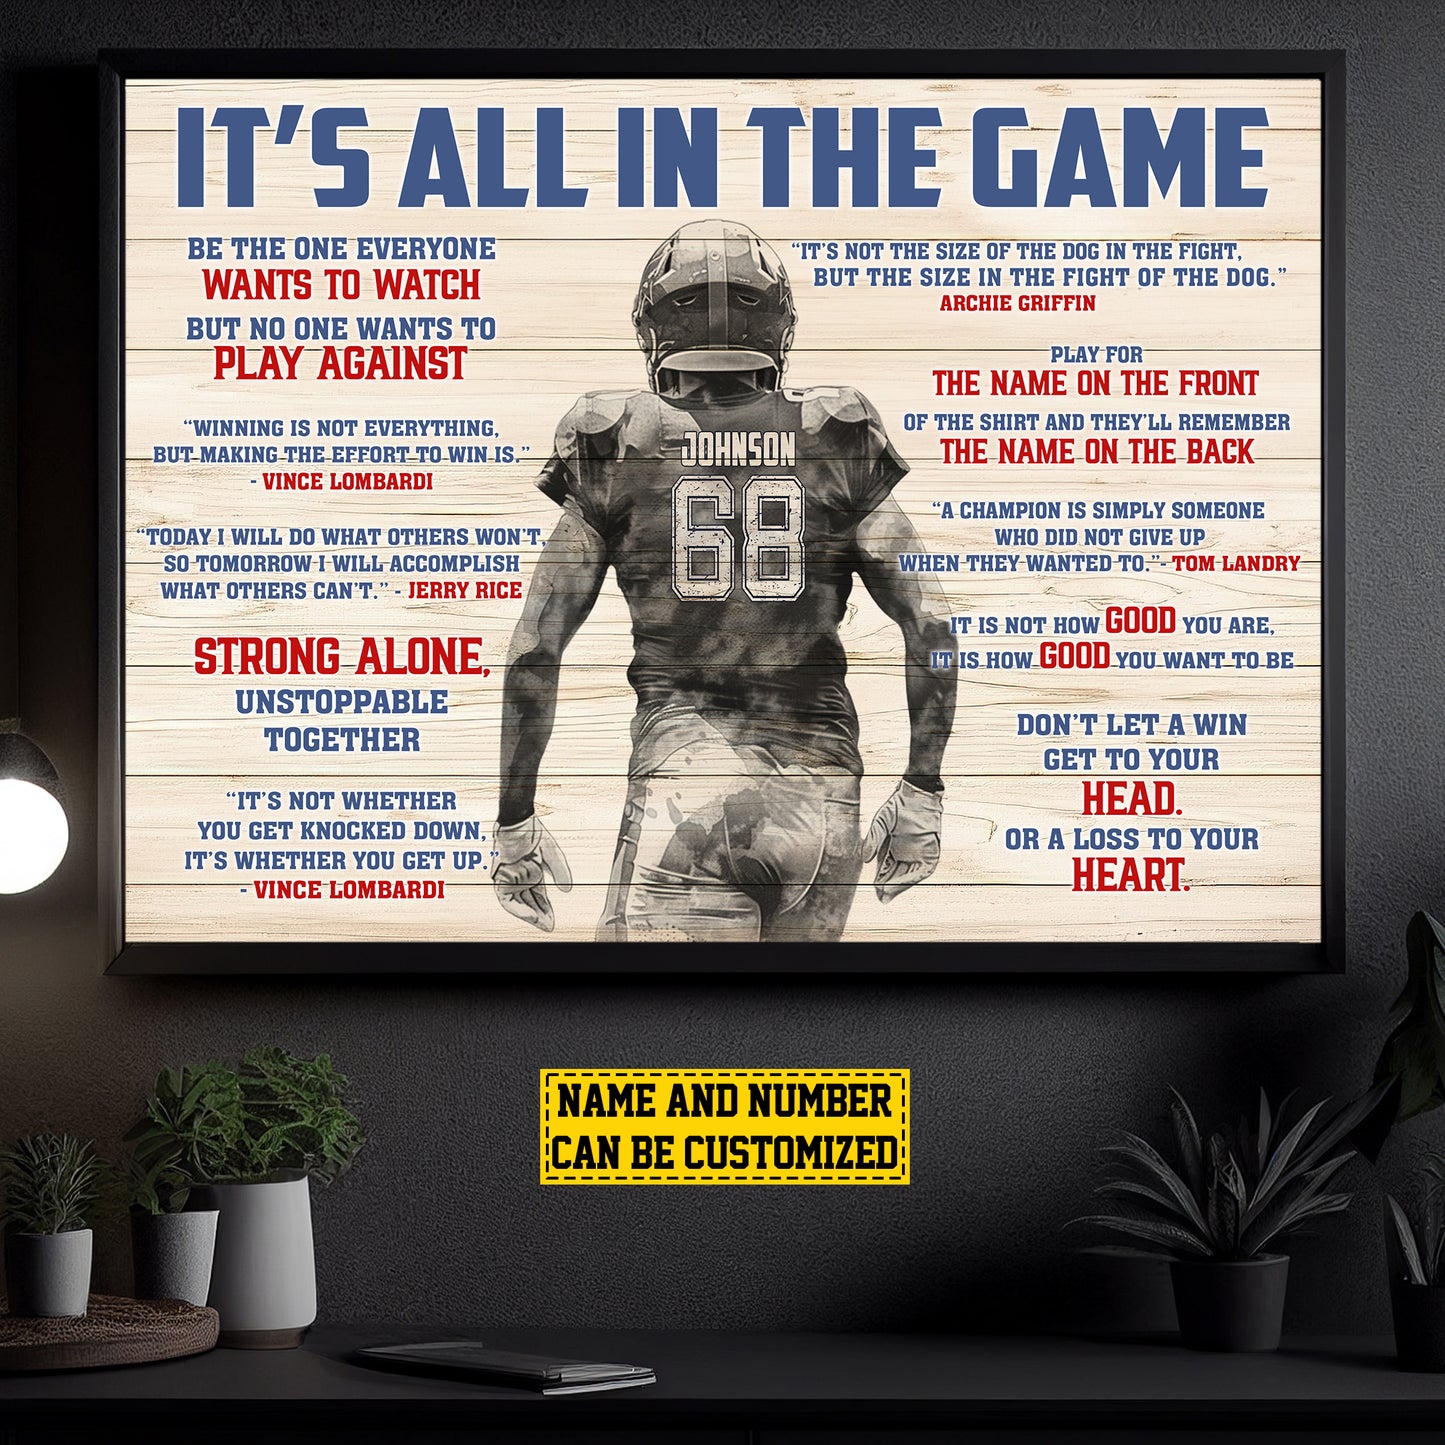 It's All In The Game, Personalized Motivational Football Boy Canvas Painting, Inspirational Quotes Wall Art Decor, Poster Gift For Football Lovers, Football Boy Players